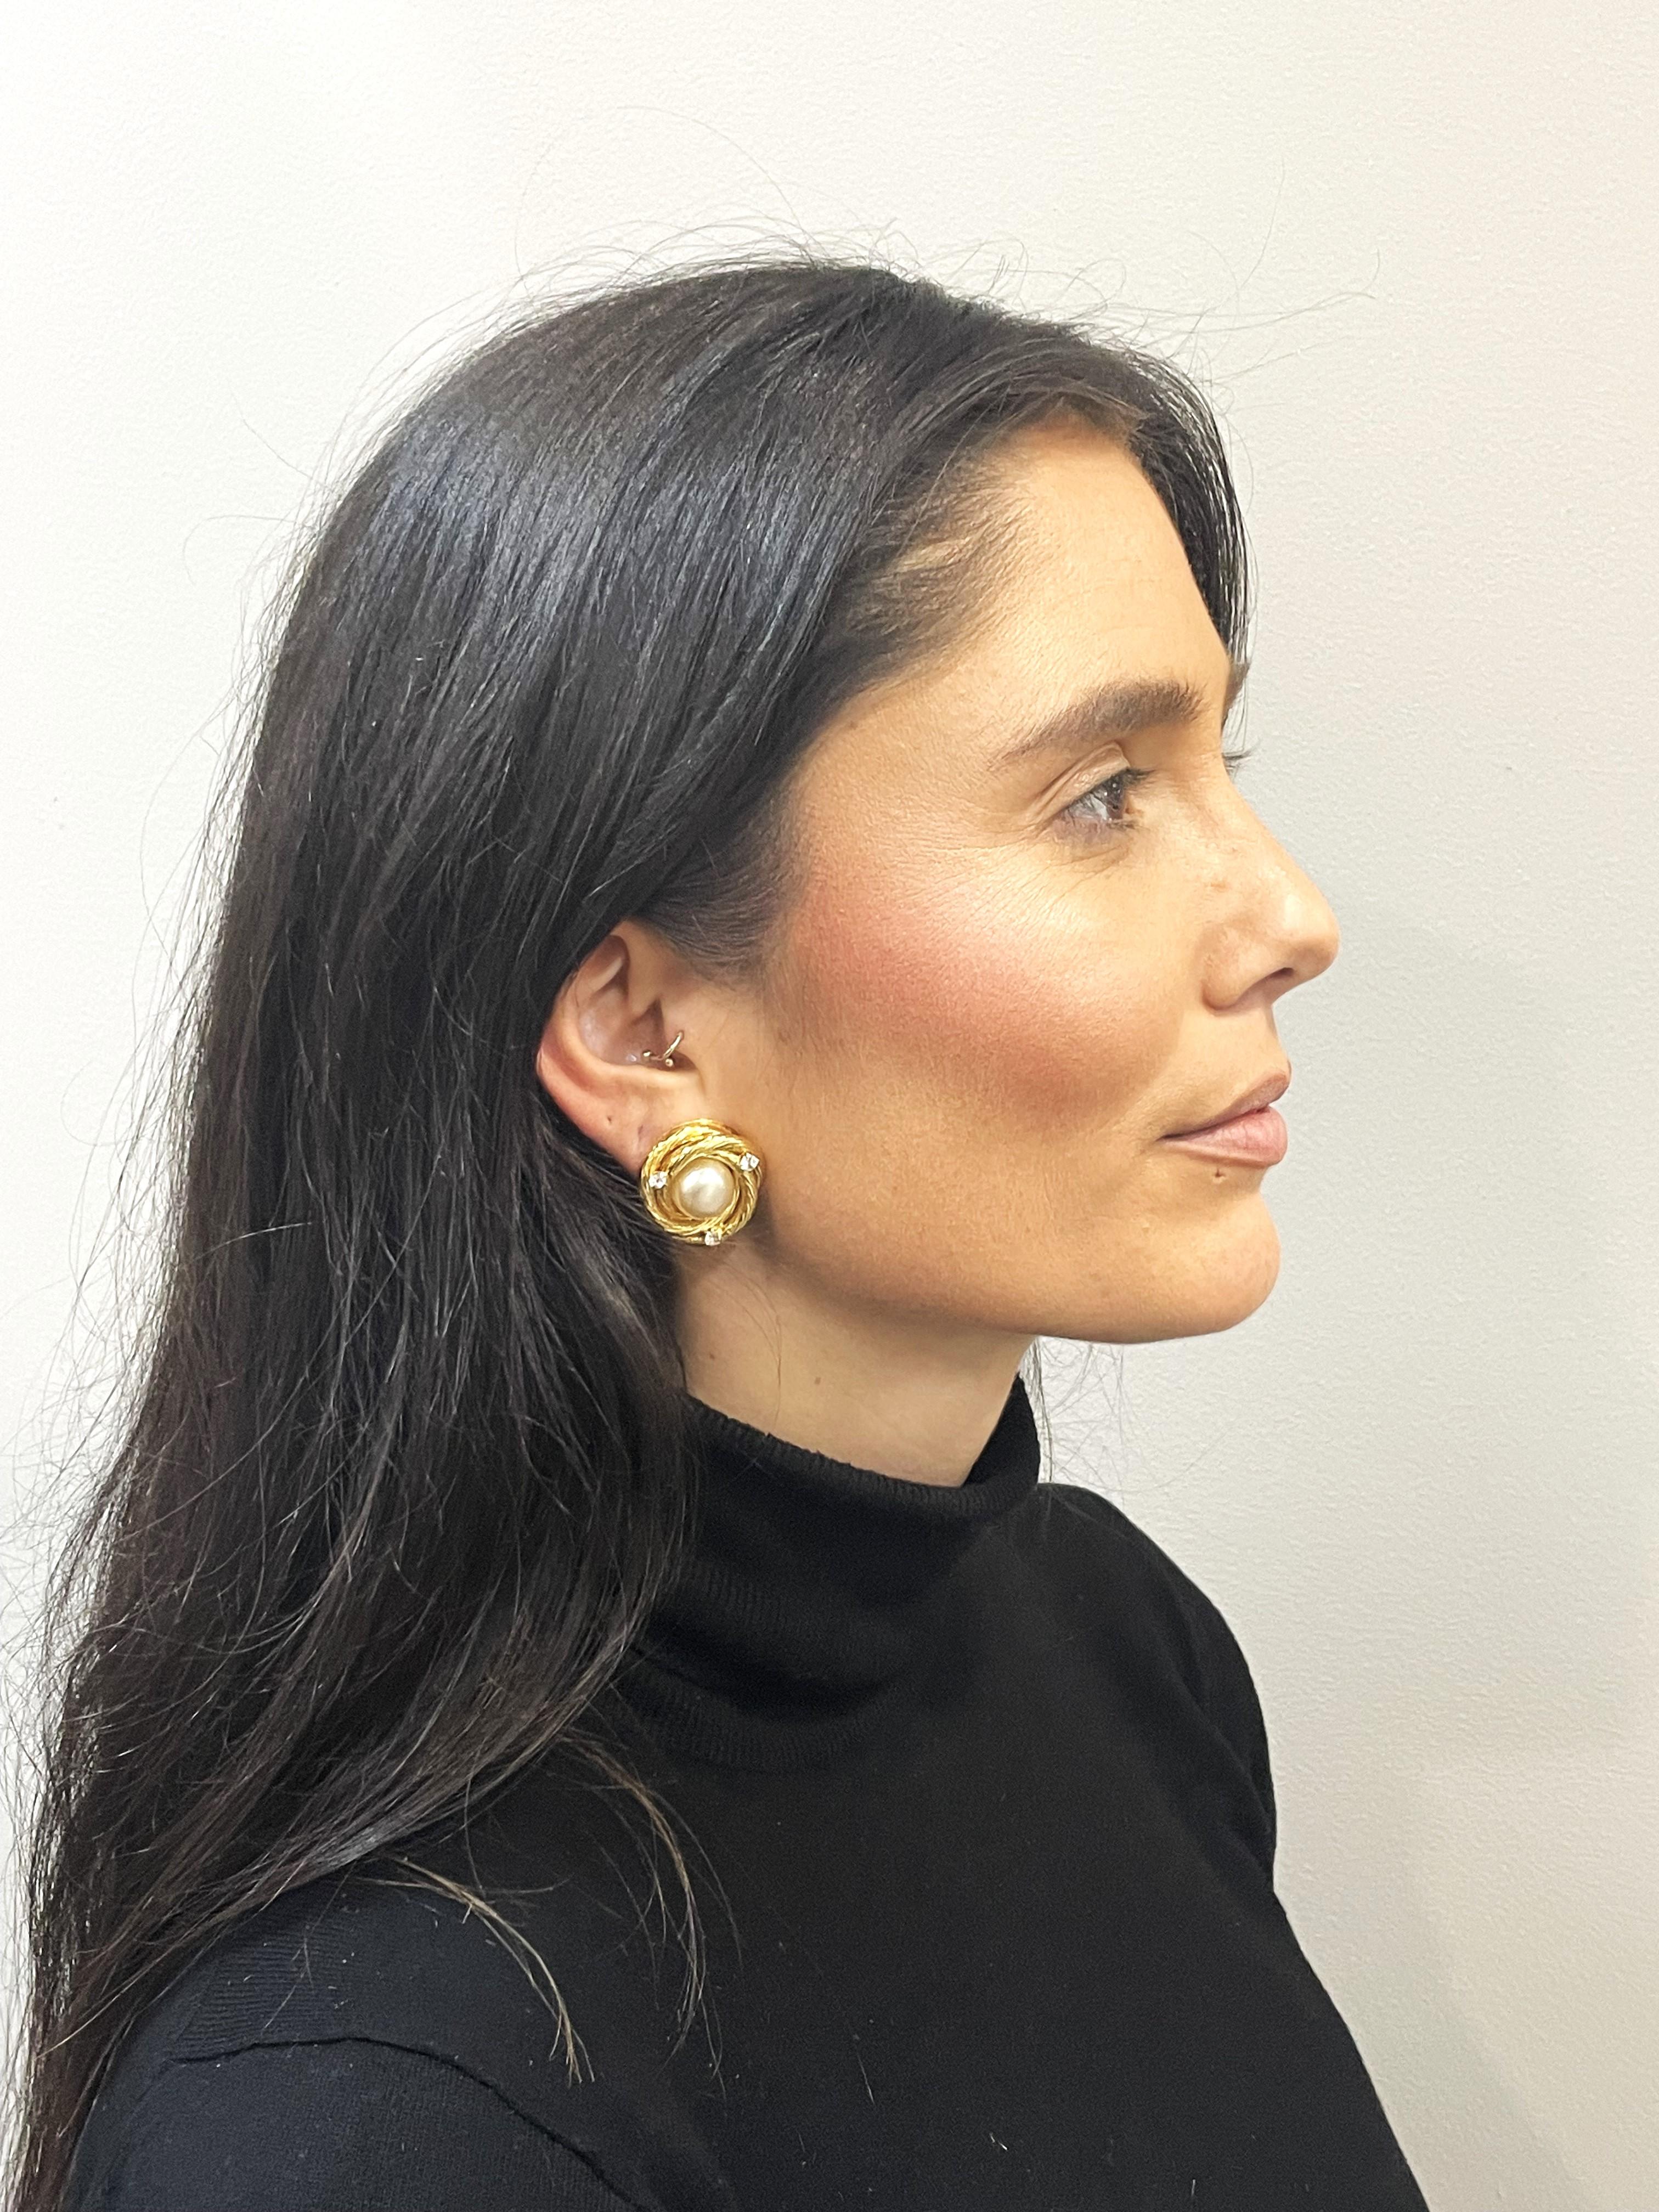 Iconic gold plated CHANEL CLIP-ON EARRING,
In the middle there is a hand-crafted pearl that is wrapped with the typical Chanel cord and decorated with 3 small rhinestones. 

Measurement
Diameter of the round Chanel ear clip is 2.5 cm, diameter of